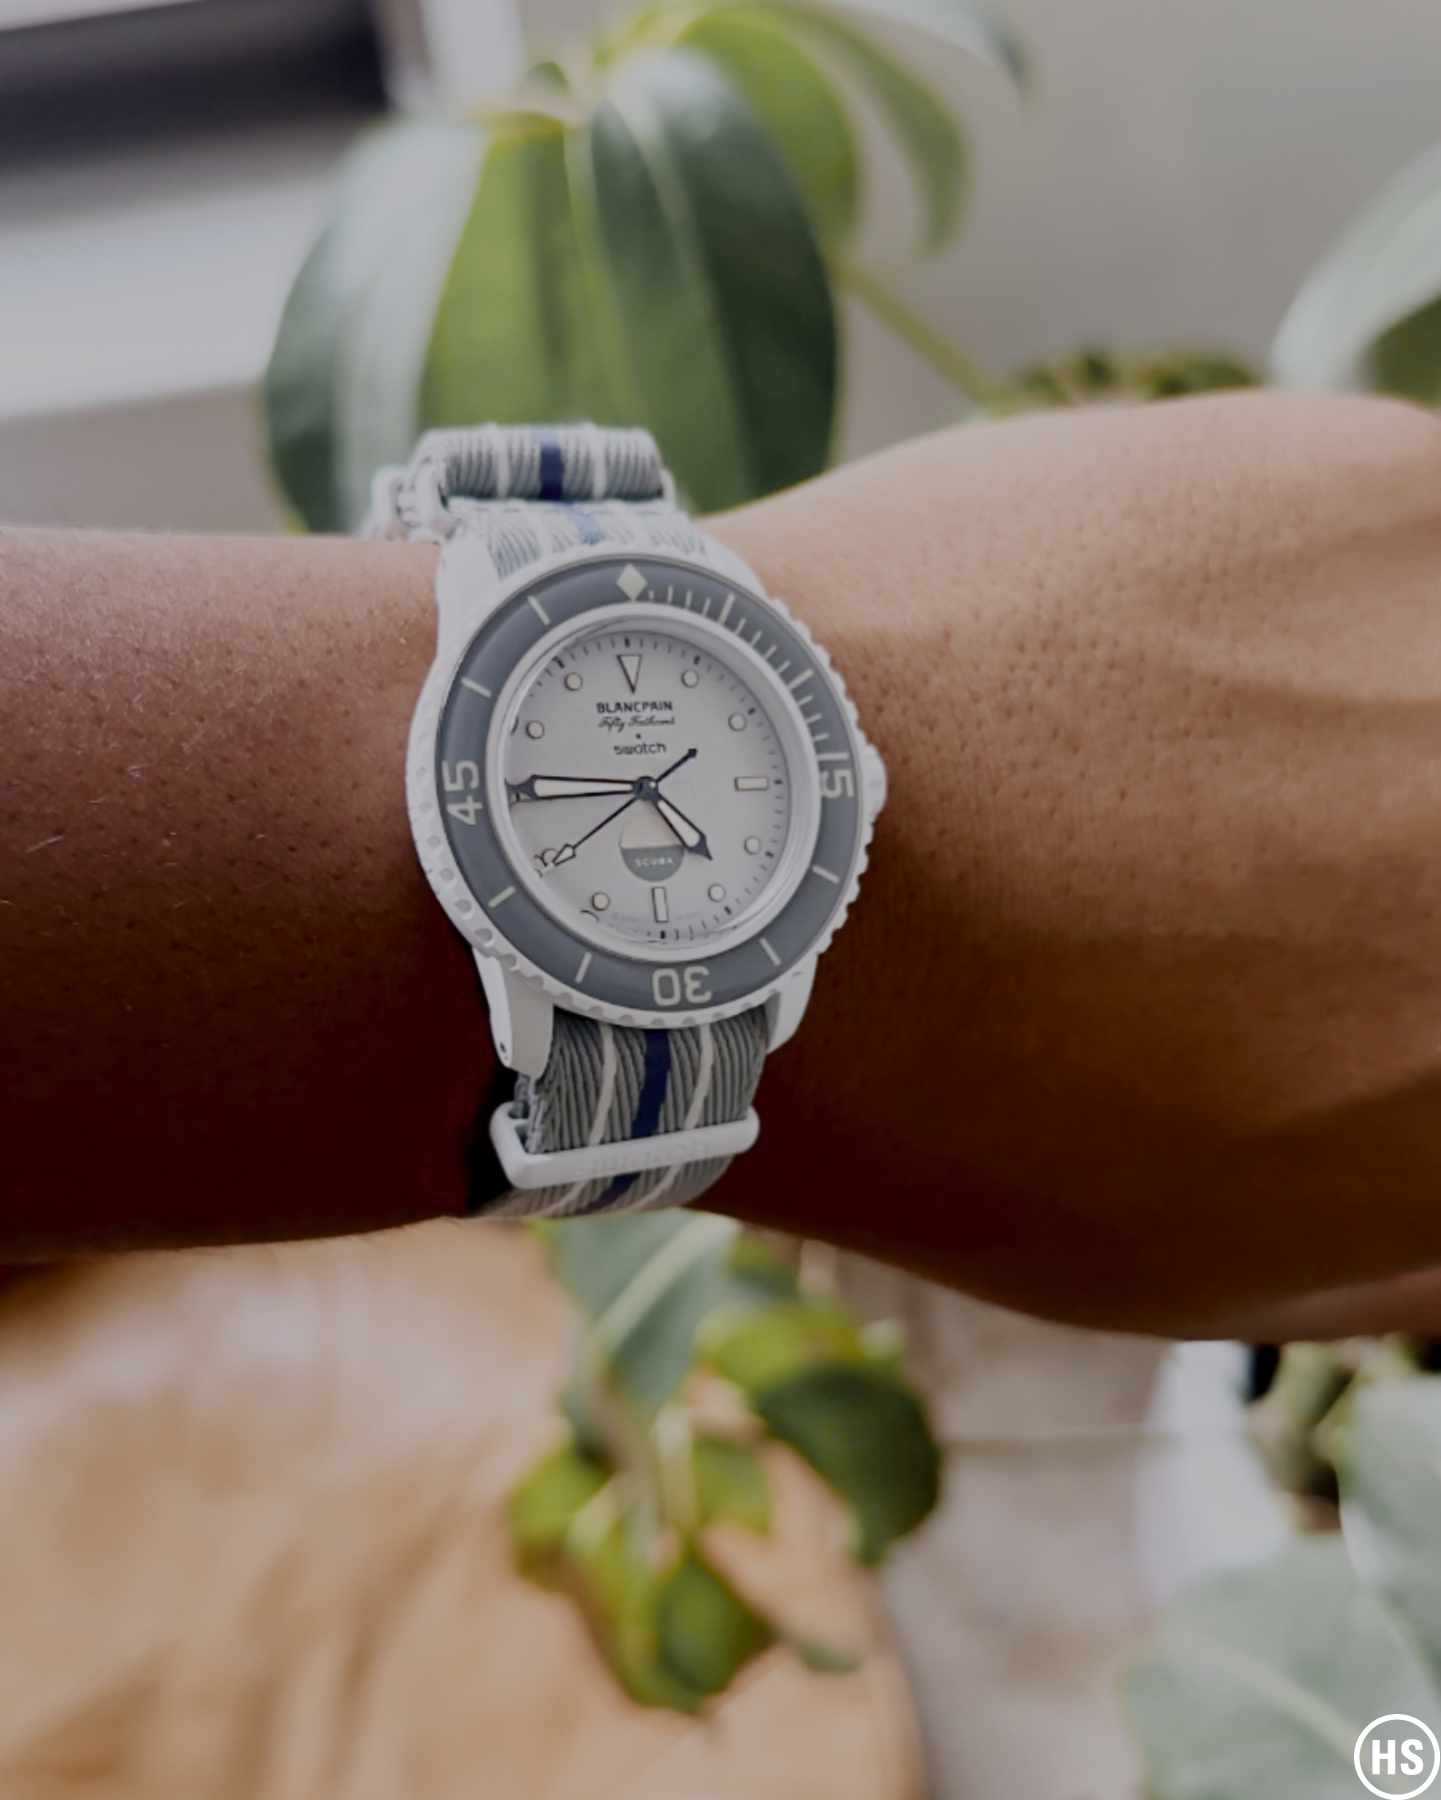 Up Close With the Swatch x Blancpain Fifty Fathoms Watch Collab